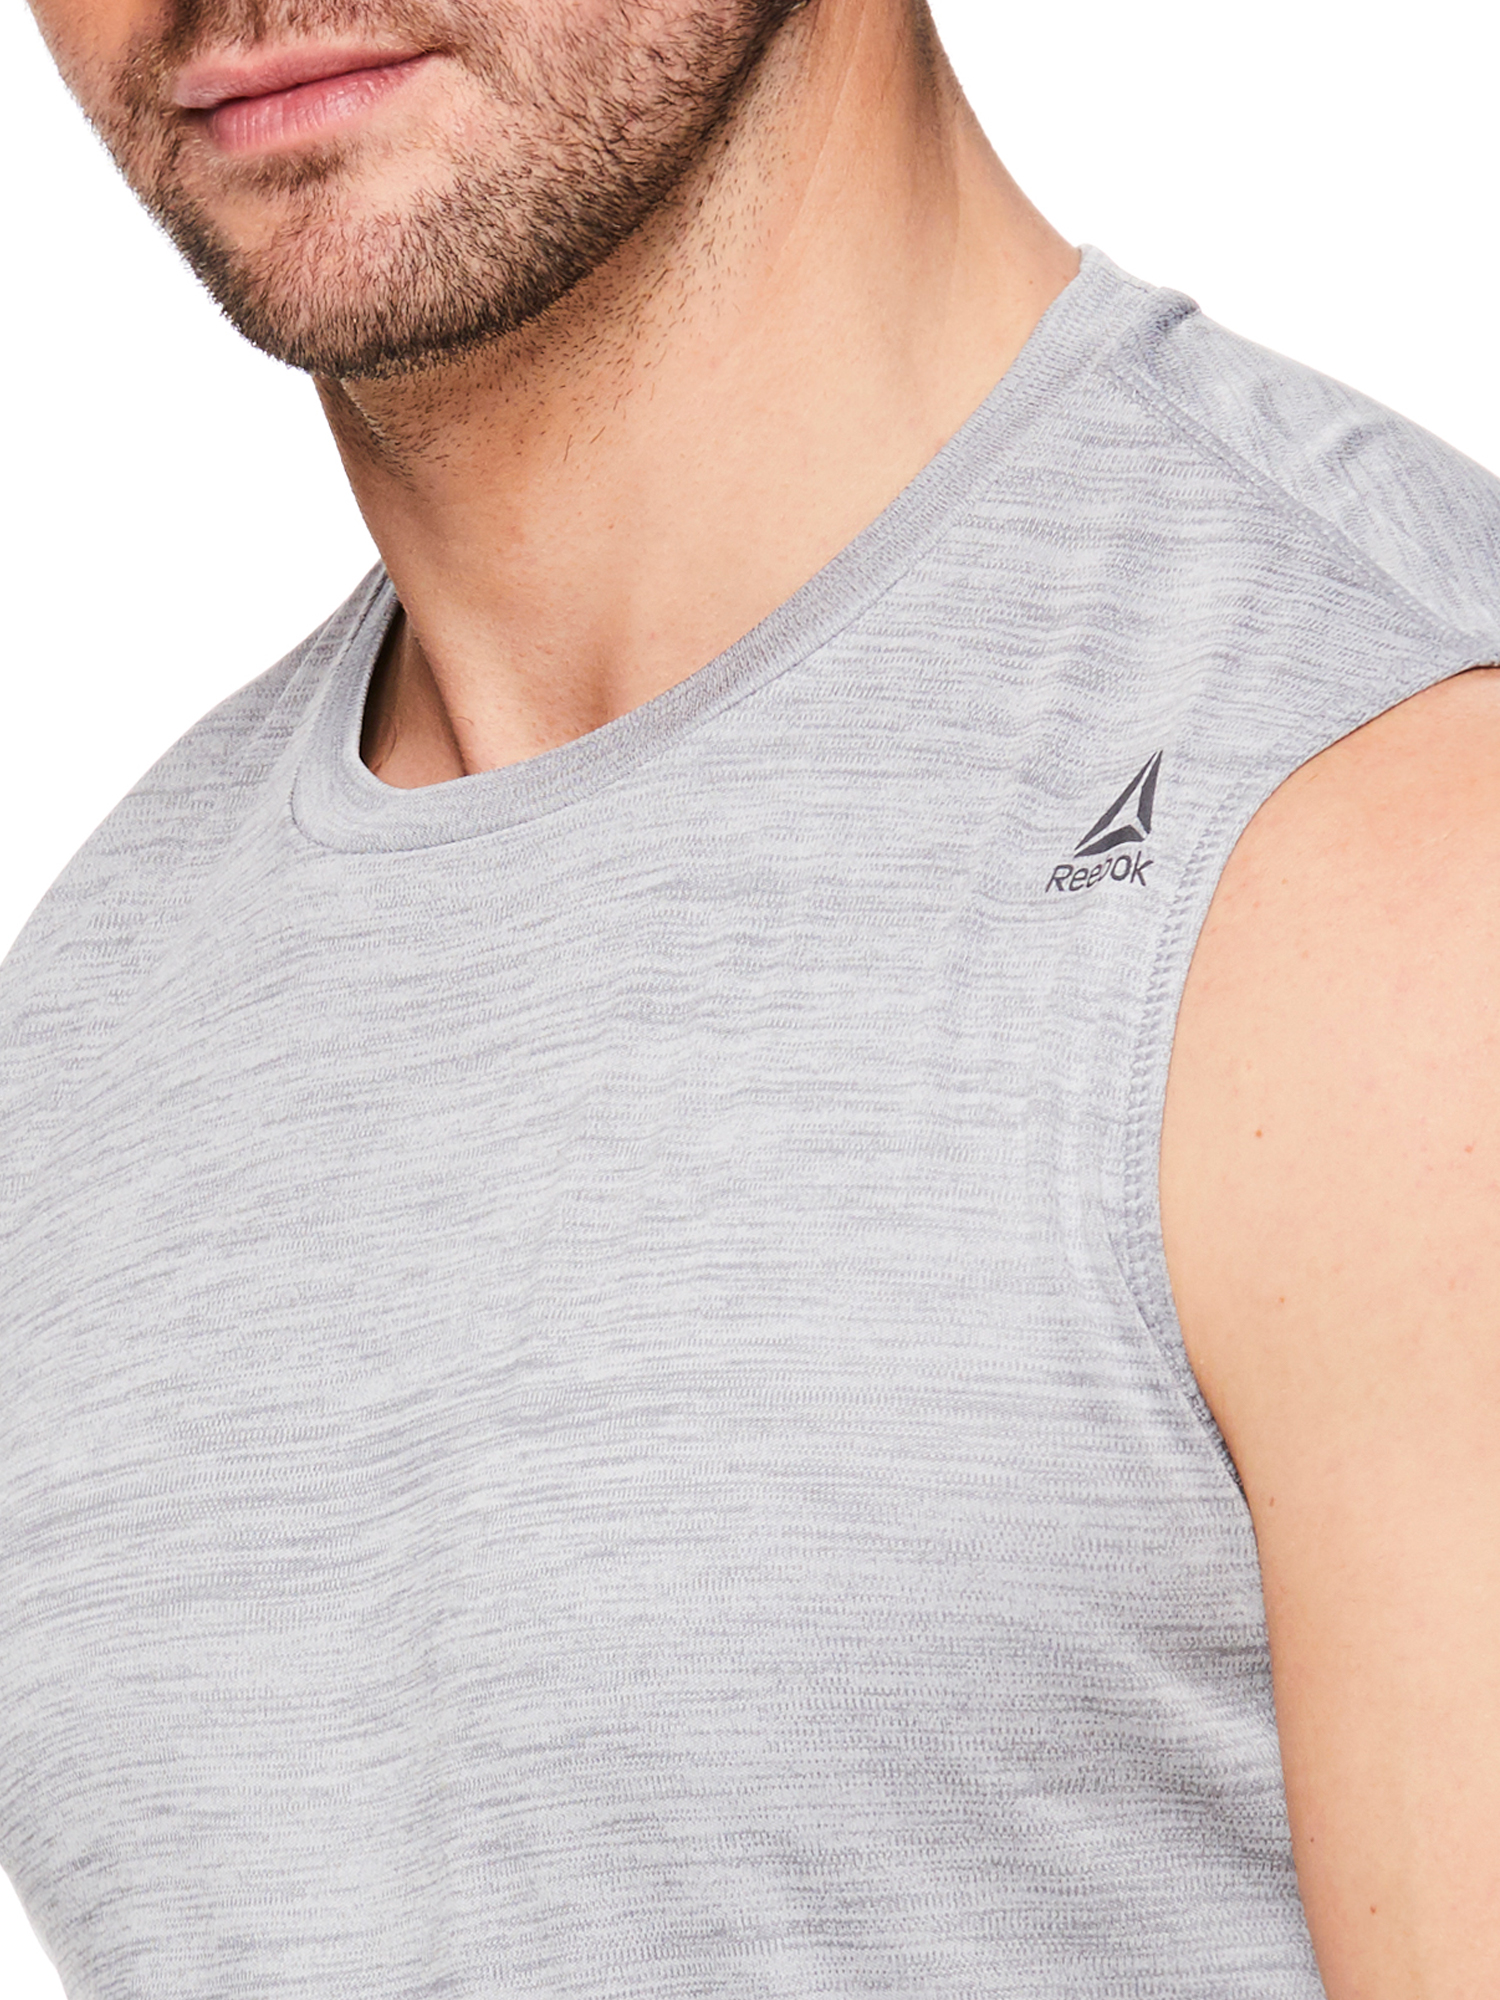 Reebok Men's Charger Muscle Tank Top - image 3 of 4